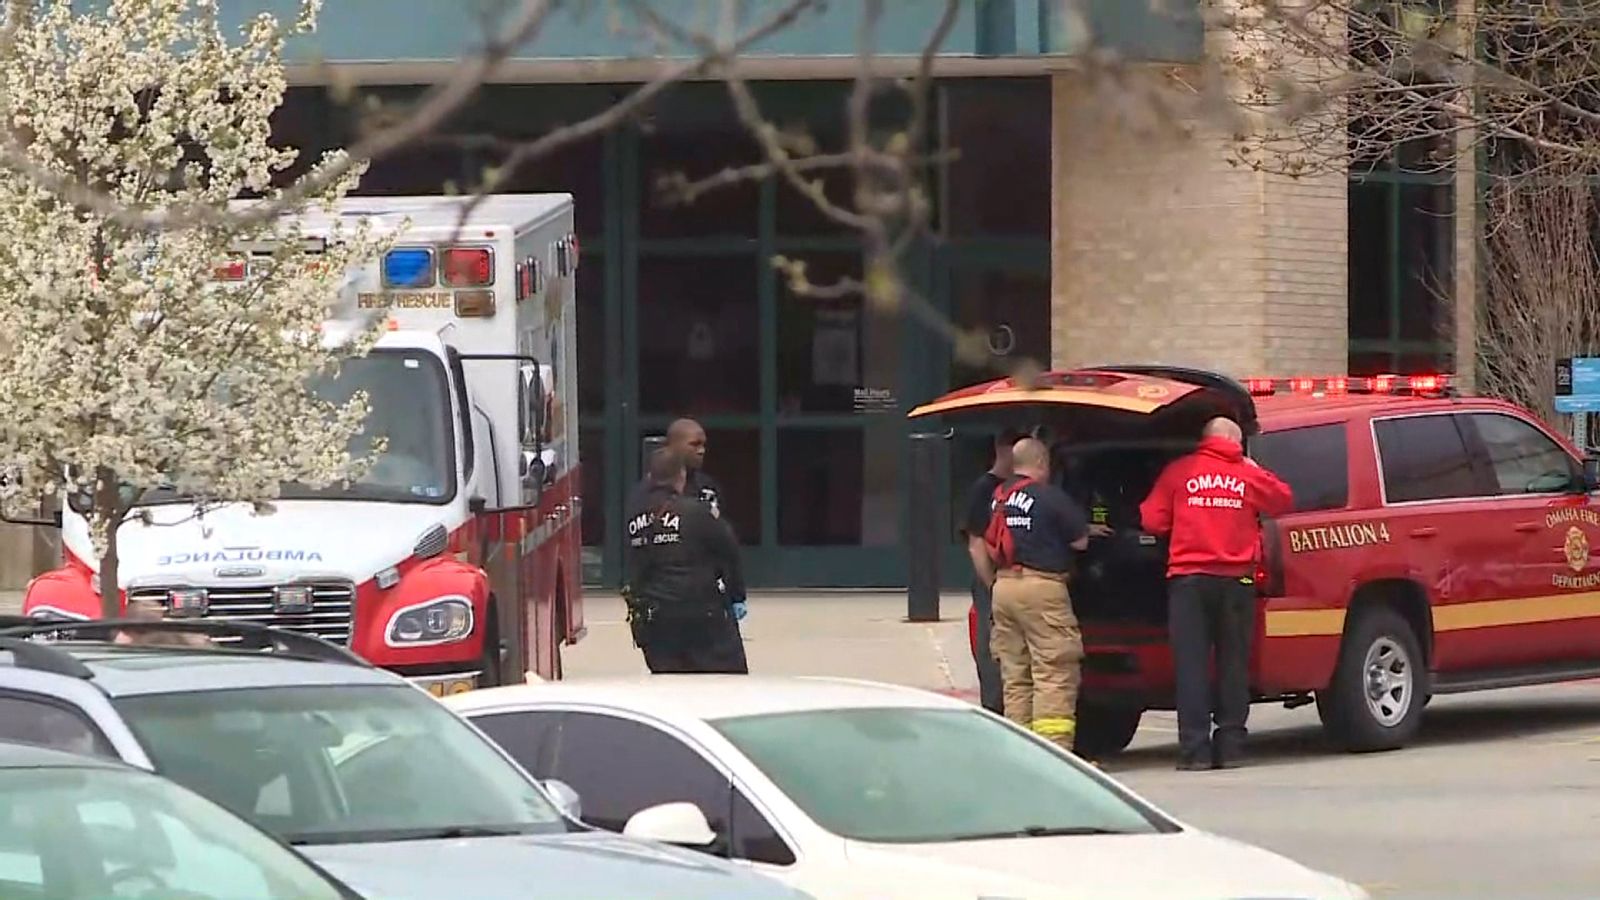 We were just so scared': 1 dead after Westroads Mall shooting